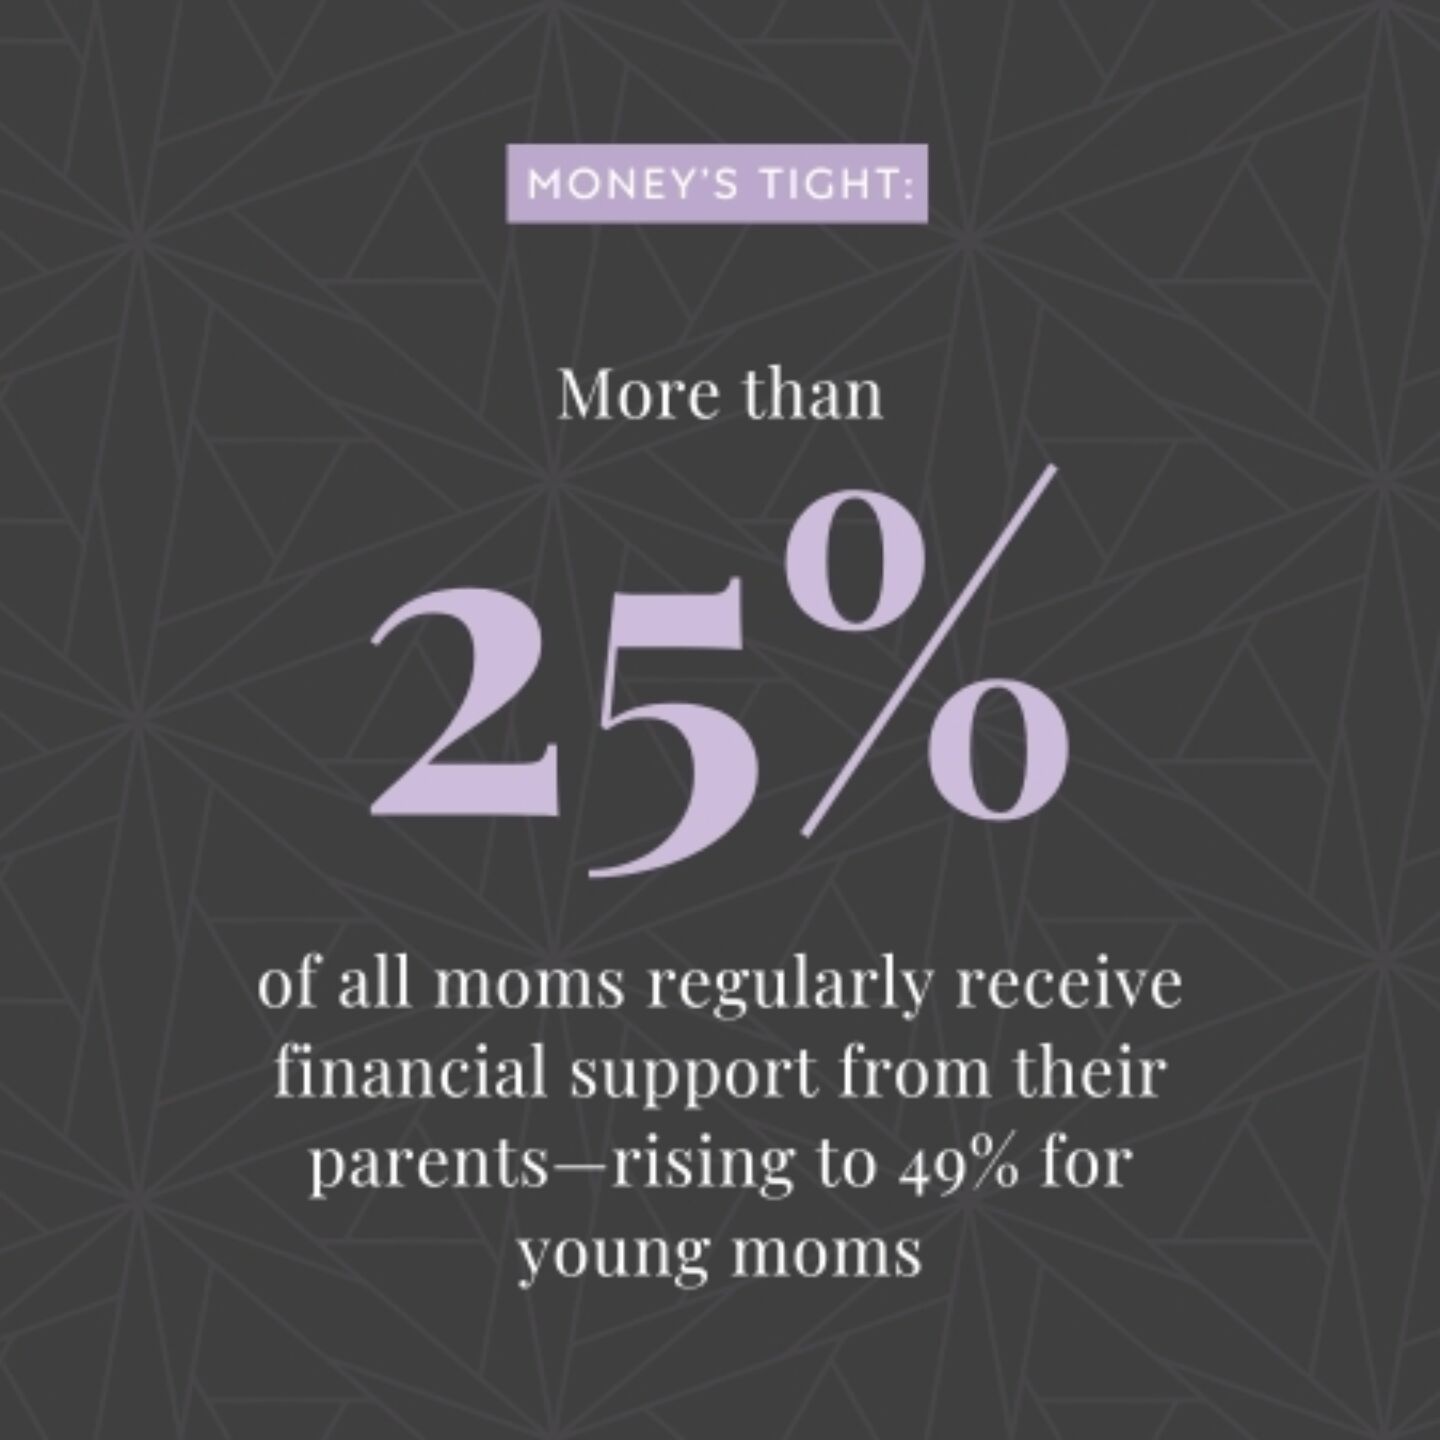 More than a quarter (27%) of all moms regularly receive financial support from their parents, rising to 49% for moms under 30 - State of motherhood